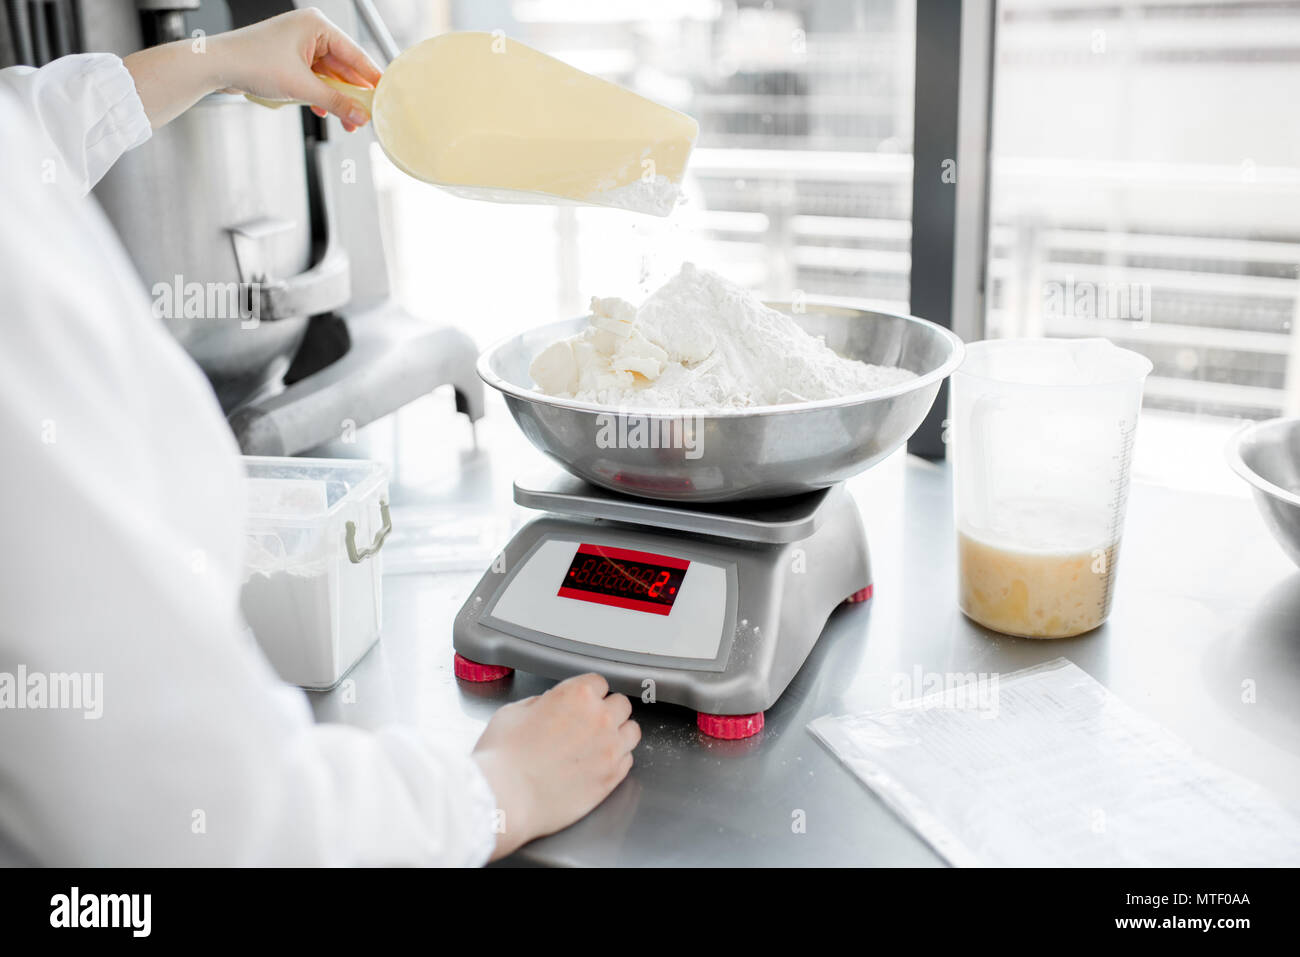 https://c8.alamy.com/comp/MTF0AA/weighing-flour-for-baking-with-professional-scales-at-the-manufacturing-close-up-view-MTF0AA.jpg